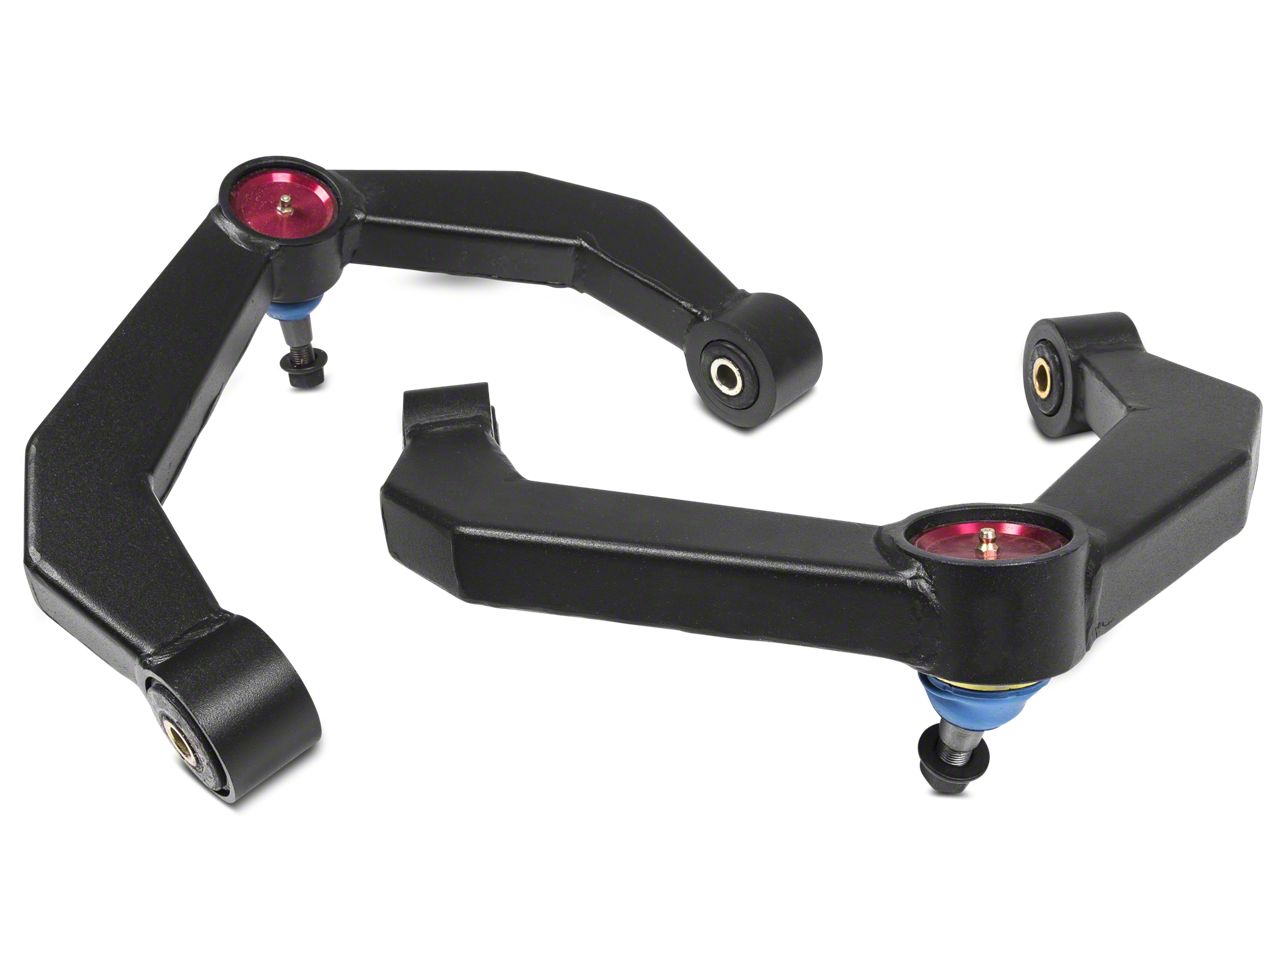 Ram 1500 Control Arms & Accessories 2009-2018